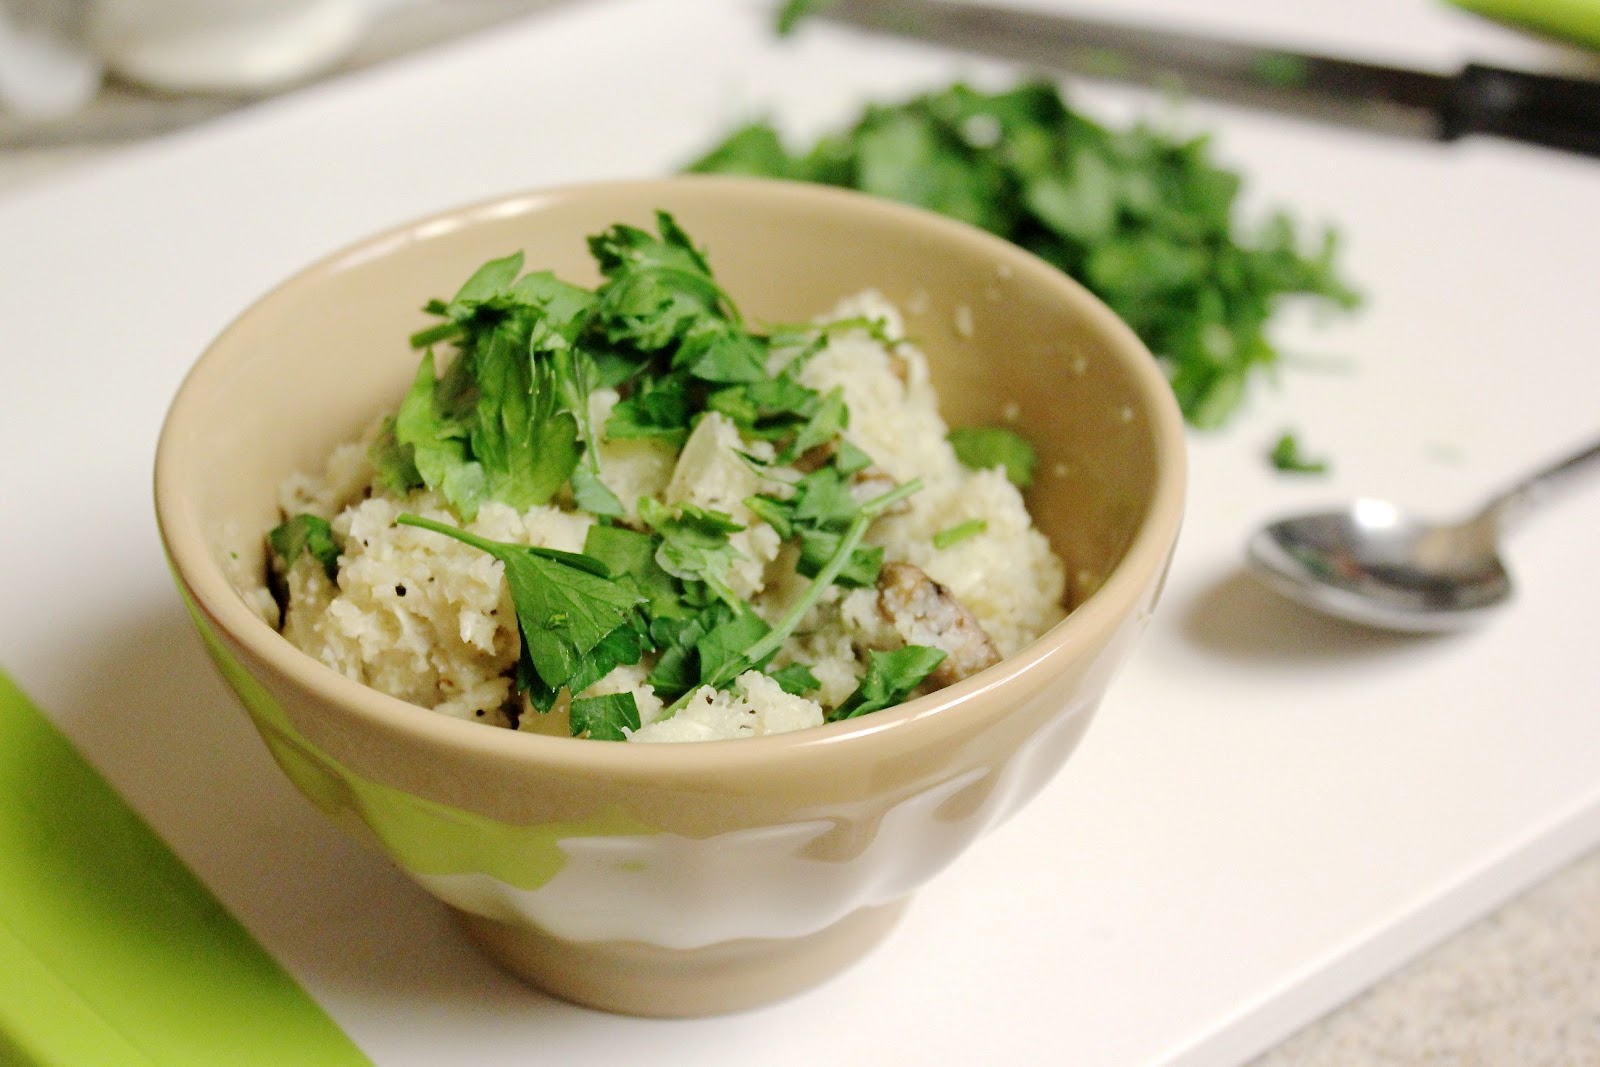 Make with your hands: Garlic Cauliflower "Couscous"